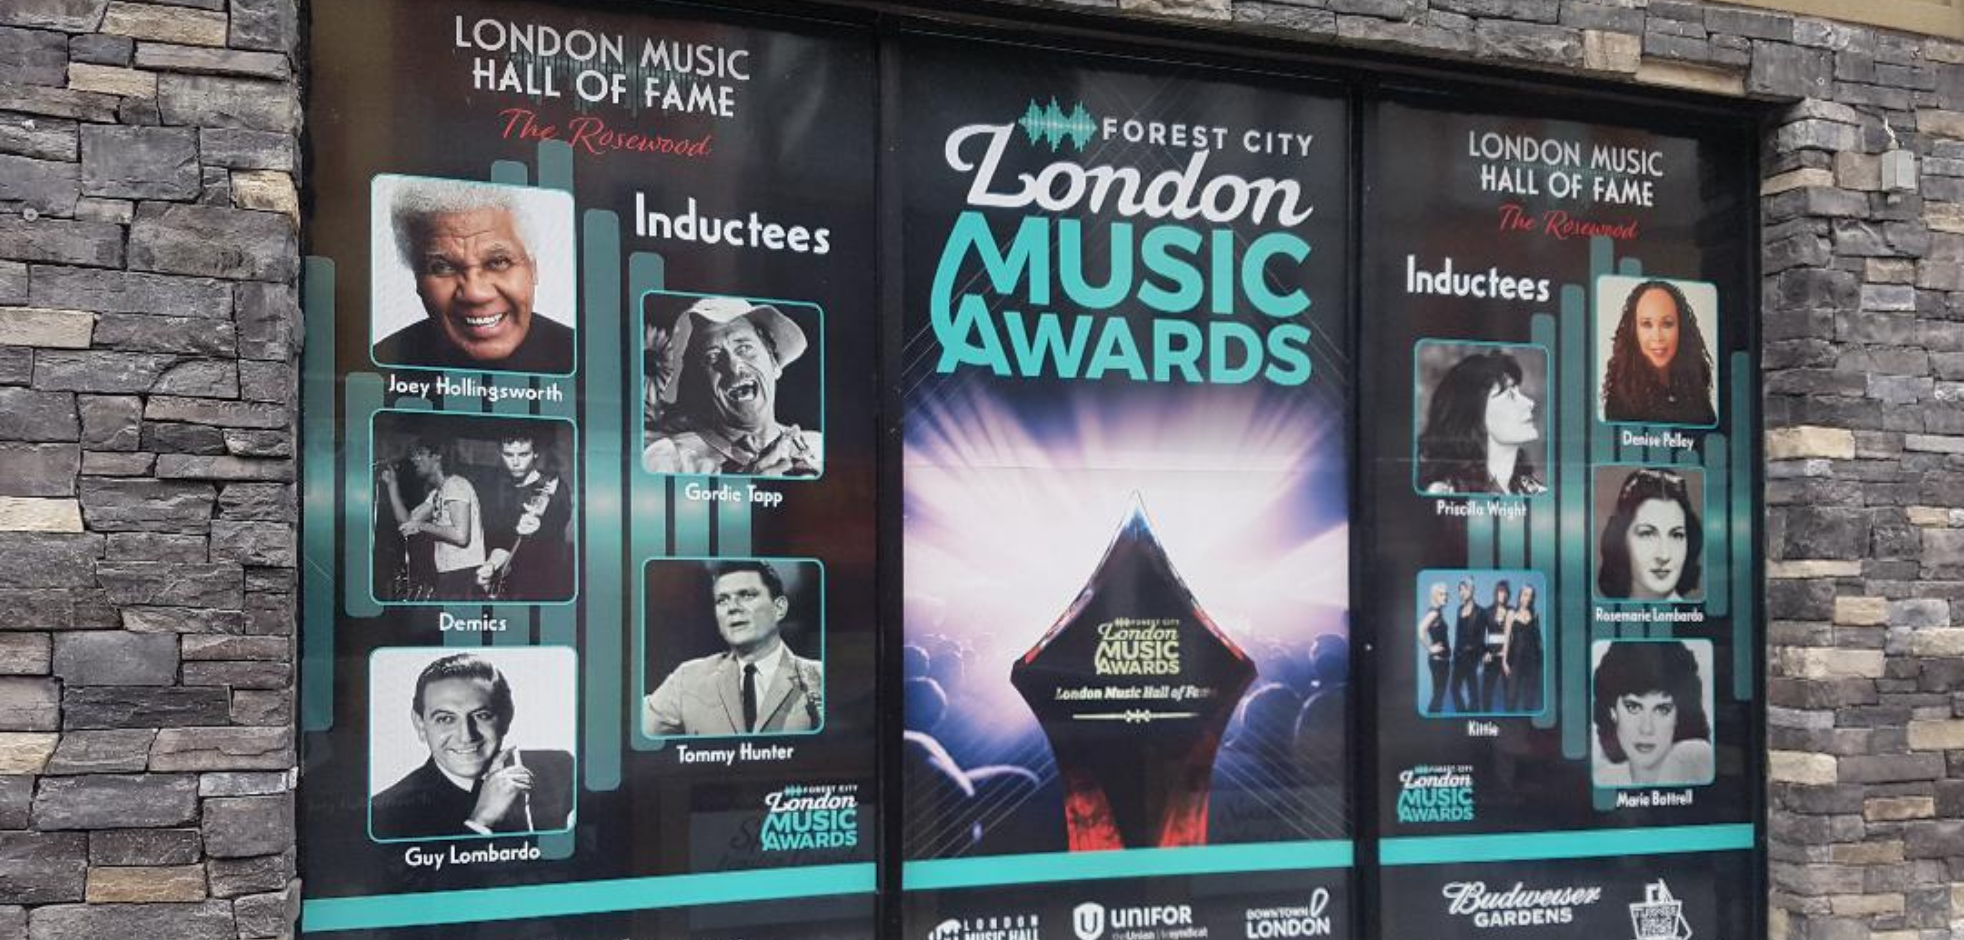 london music awards poster displayed against a brick wall